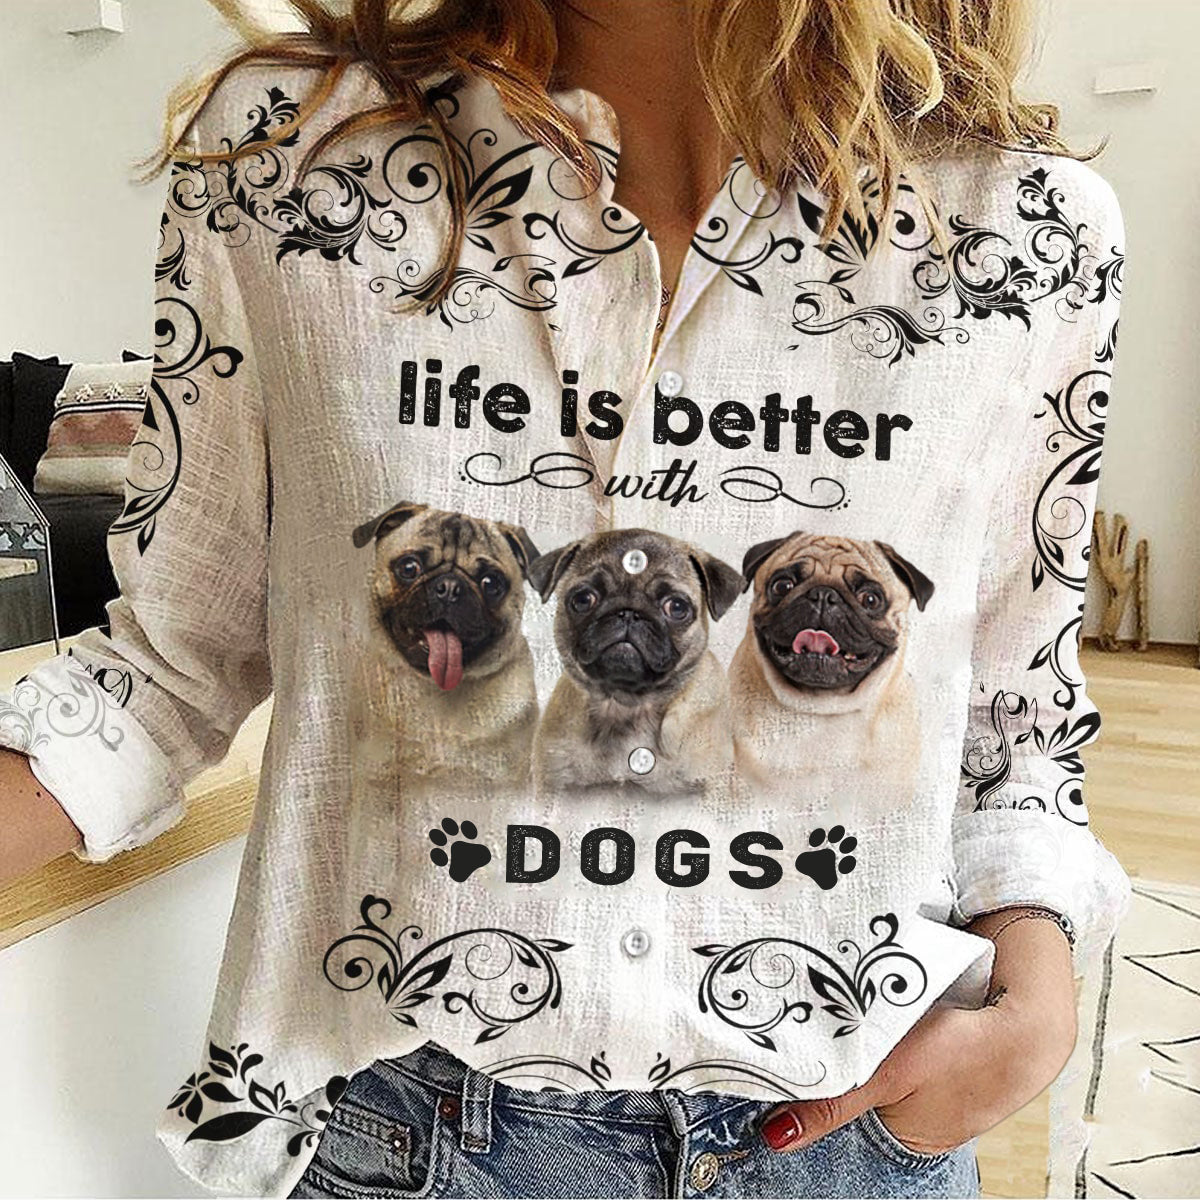 Pug -Life Is Better With Dogs Women's Long-Sleeve Shirt